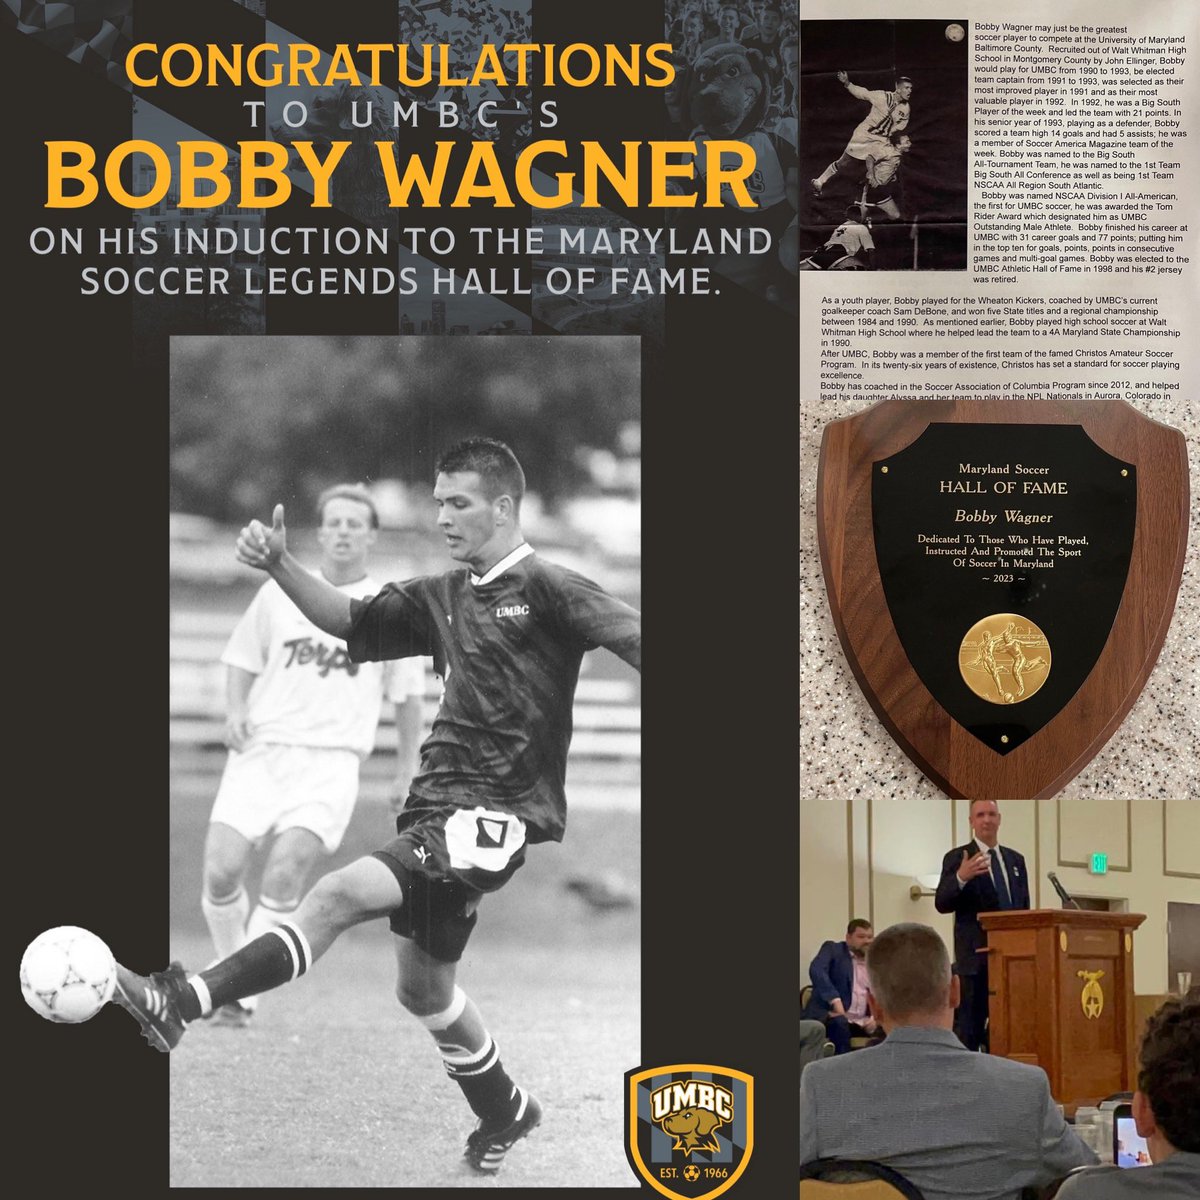 Congrats to alum and D1 All American Bobby Wagner (90-93) on his induction to the Maryland Soccer Legends Hall of Fame! Great to see so many alum come out and support a special night. #RetrieverNation #UMBCProud